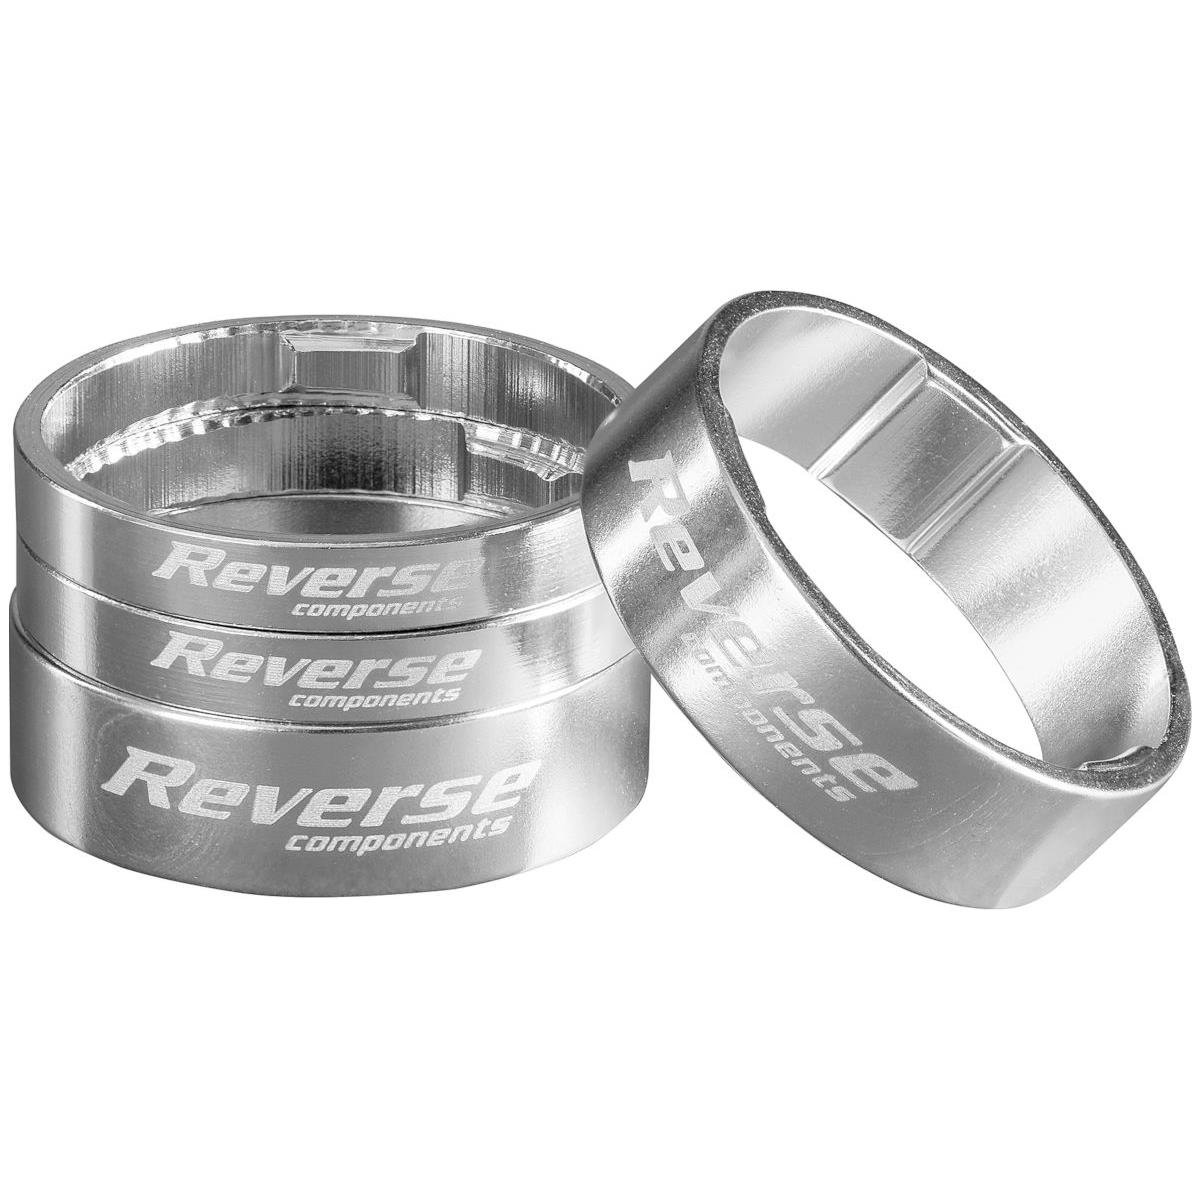 Reverse Components Head Set Spacer Set Ultra-Light Silver